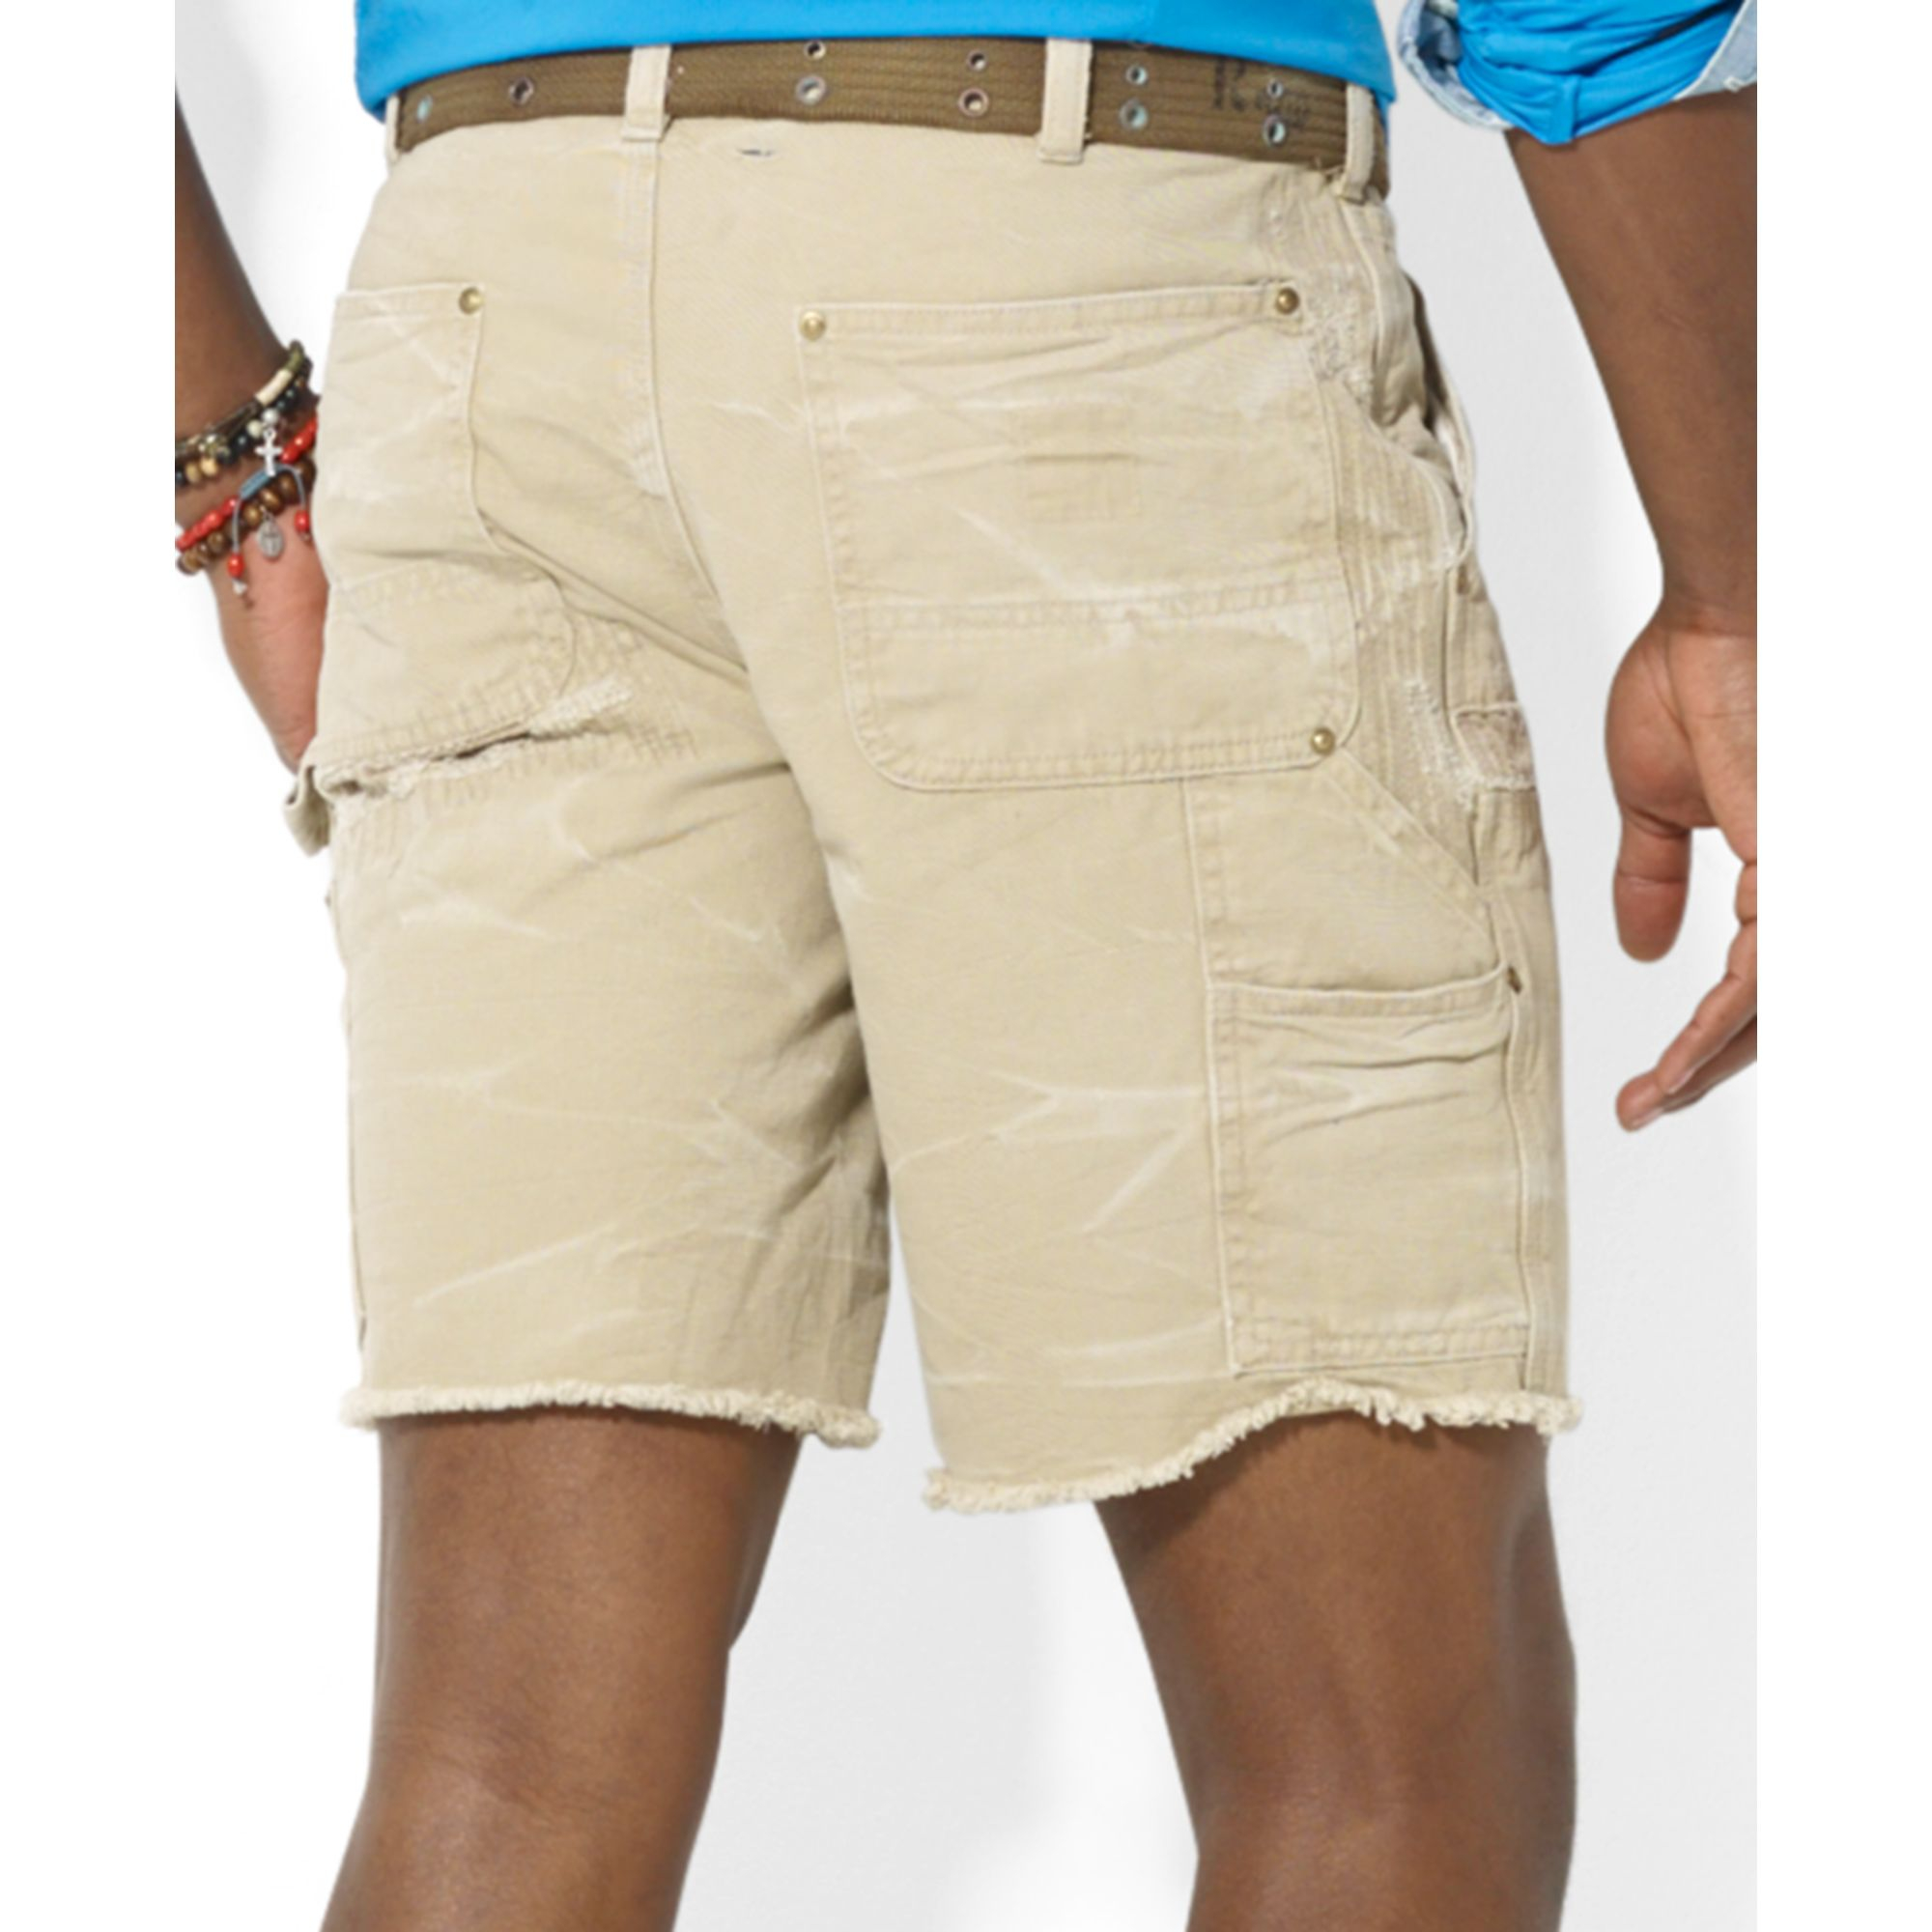 Lyst - Ralph lauren Polo Straight Fit Craftworker Cut Off Shorts in ...